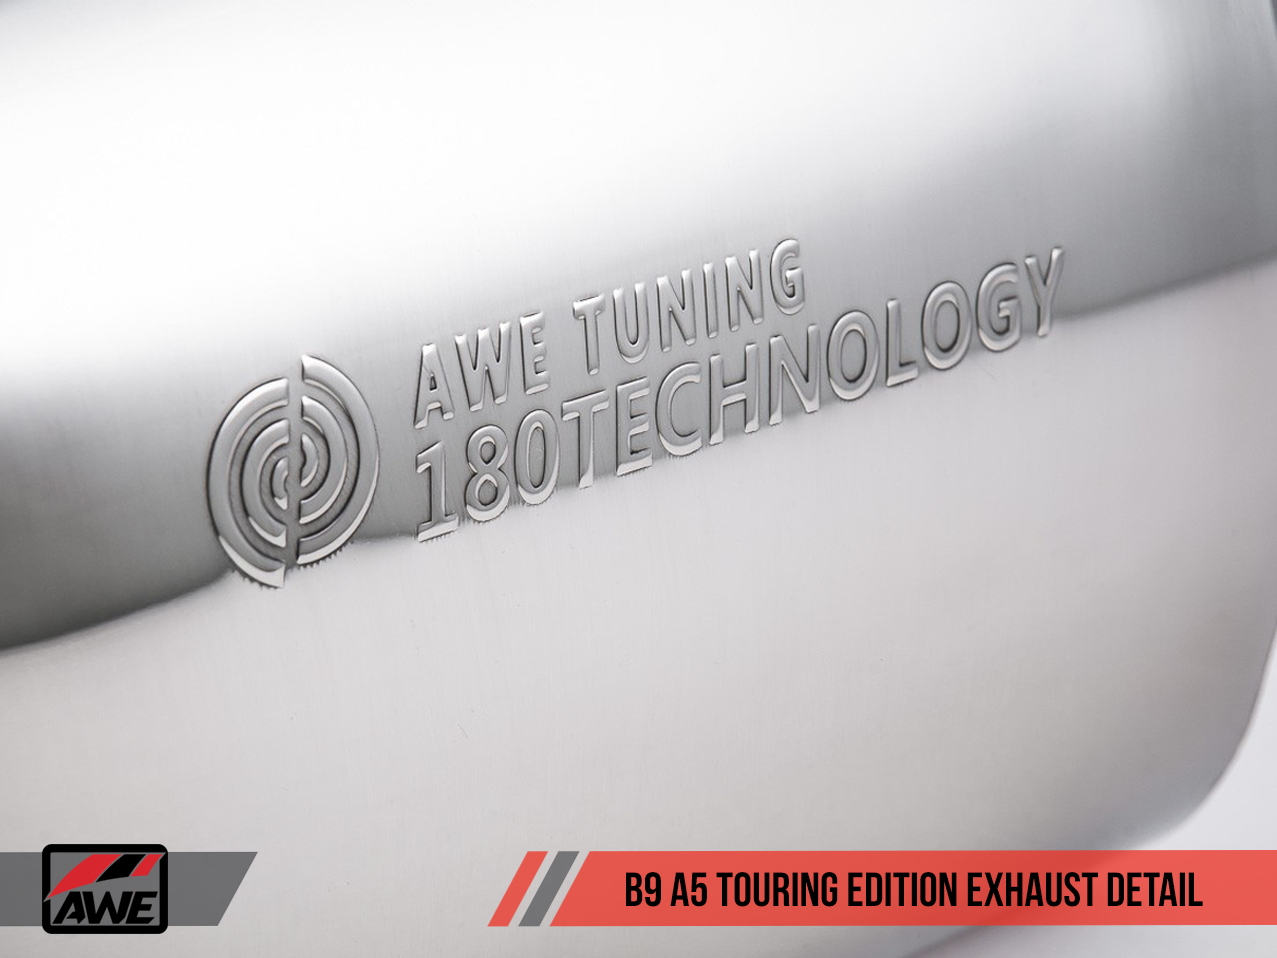 AWE Touring Edition Exhaust for B9 A5, Dual Outlet - Chrome Silver Tips (includes DP) - 0